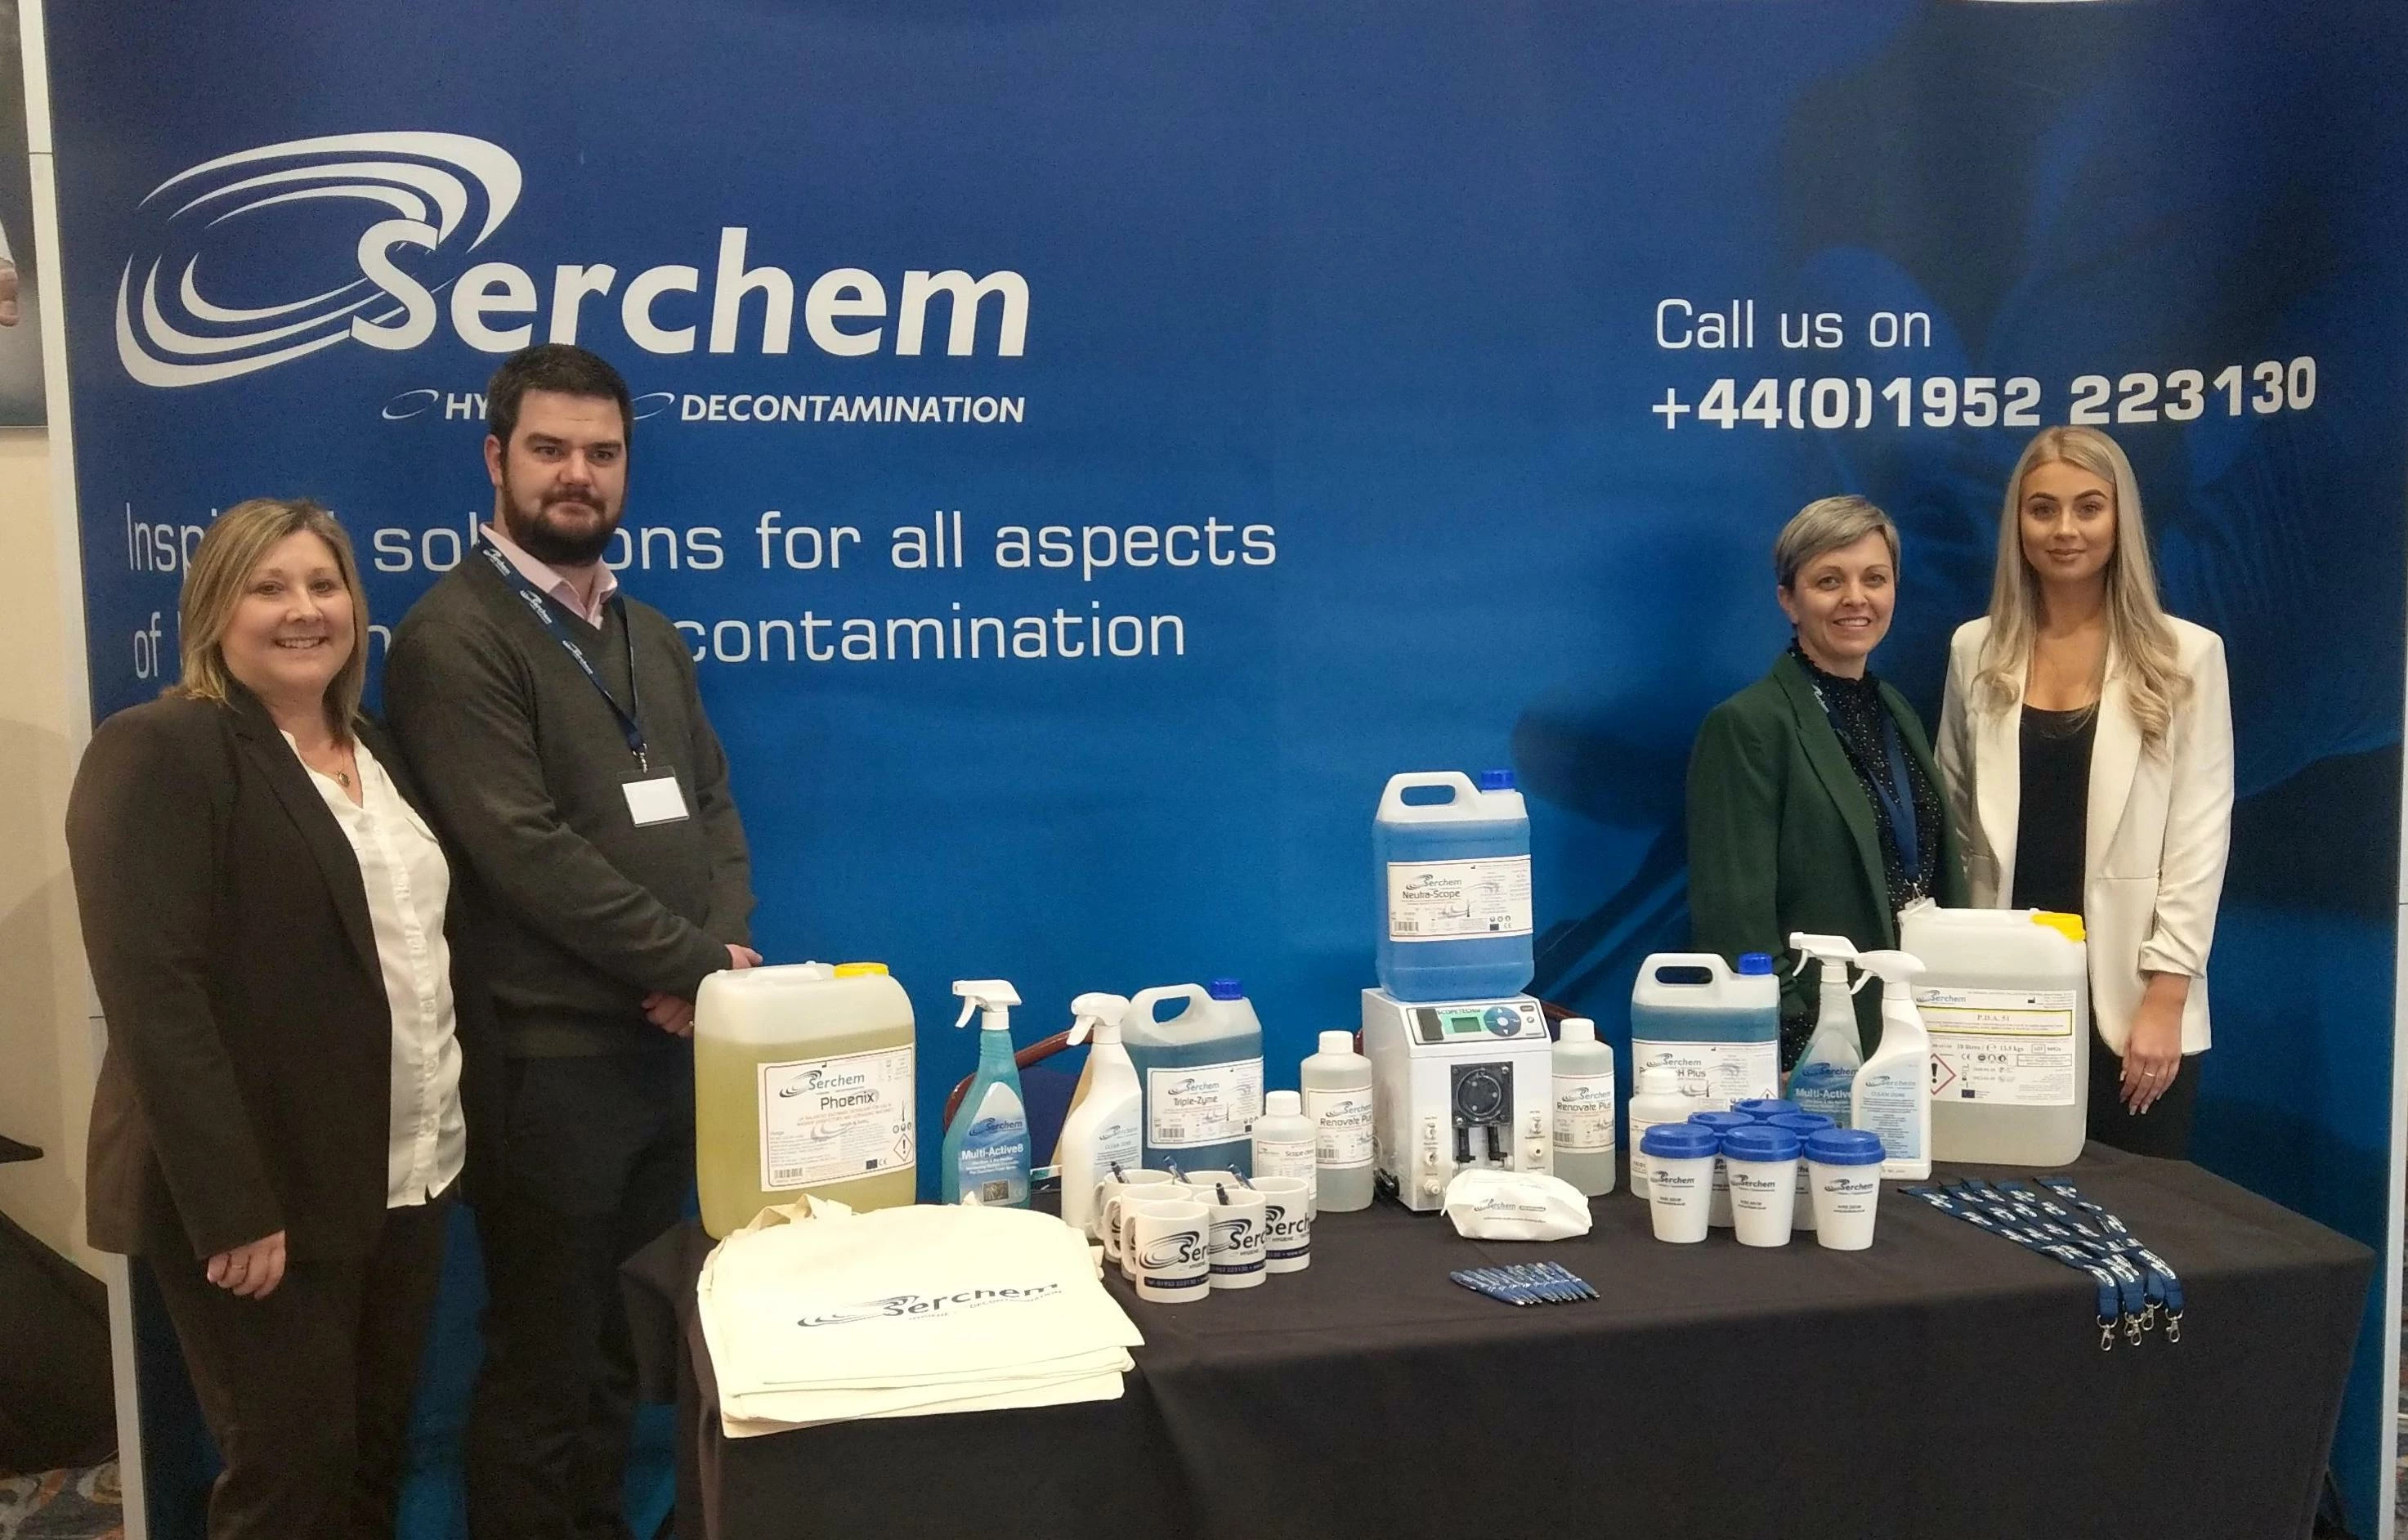 Telford-based chemical company Serchem is aiming to fast-track growth across the globe with its digital investment.